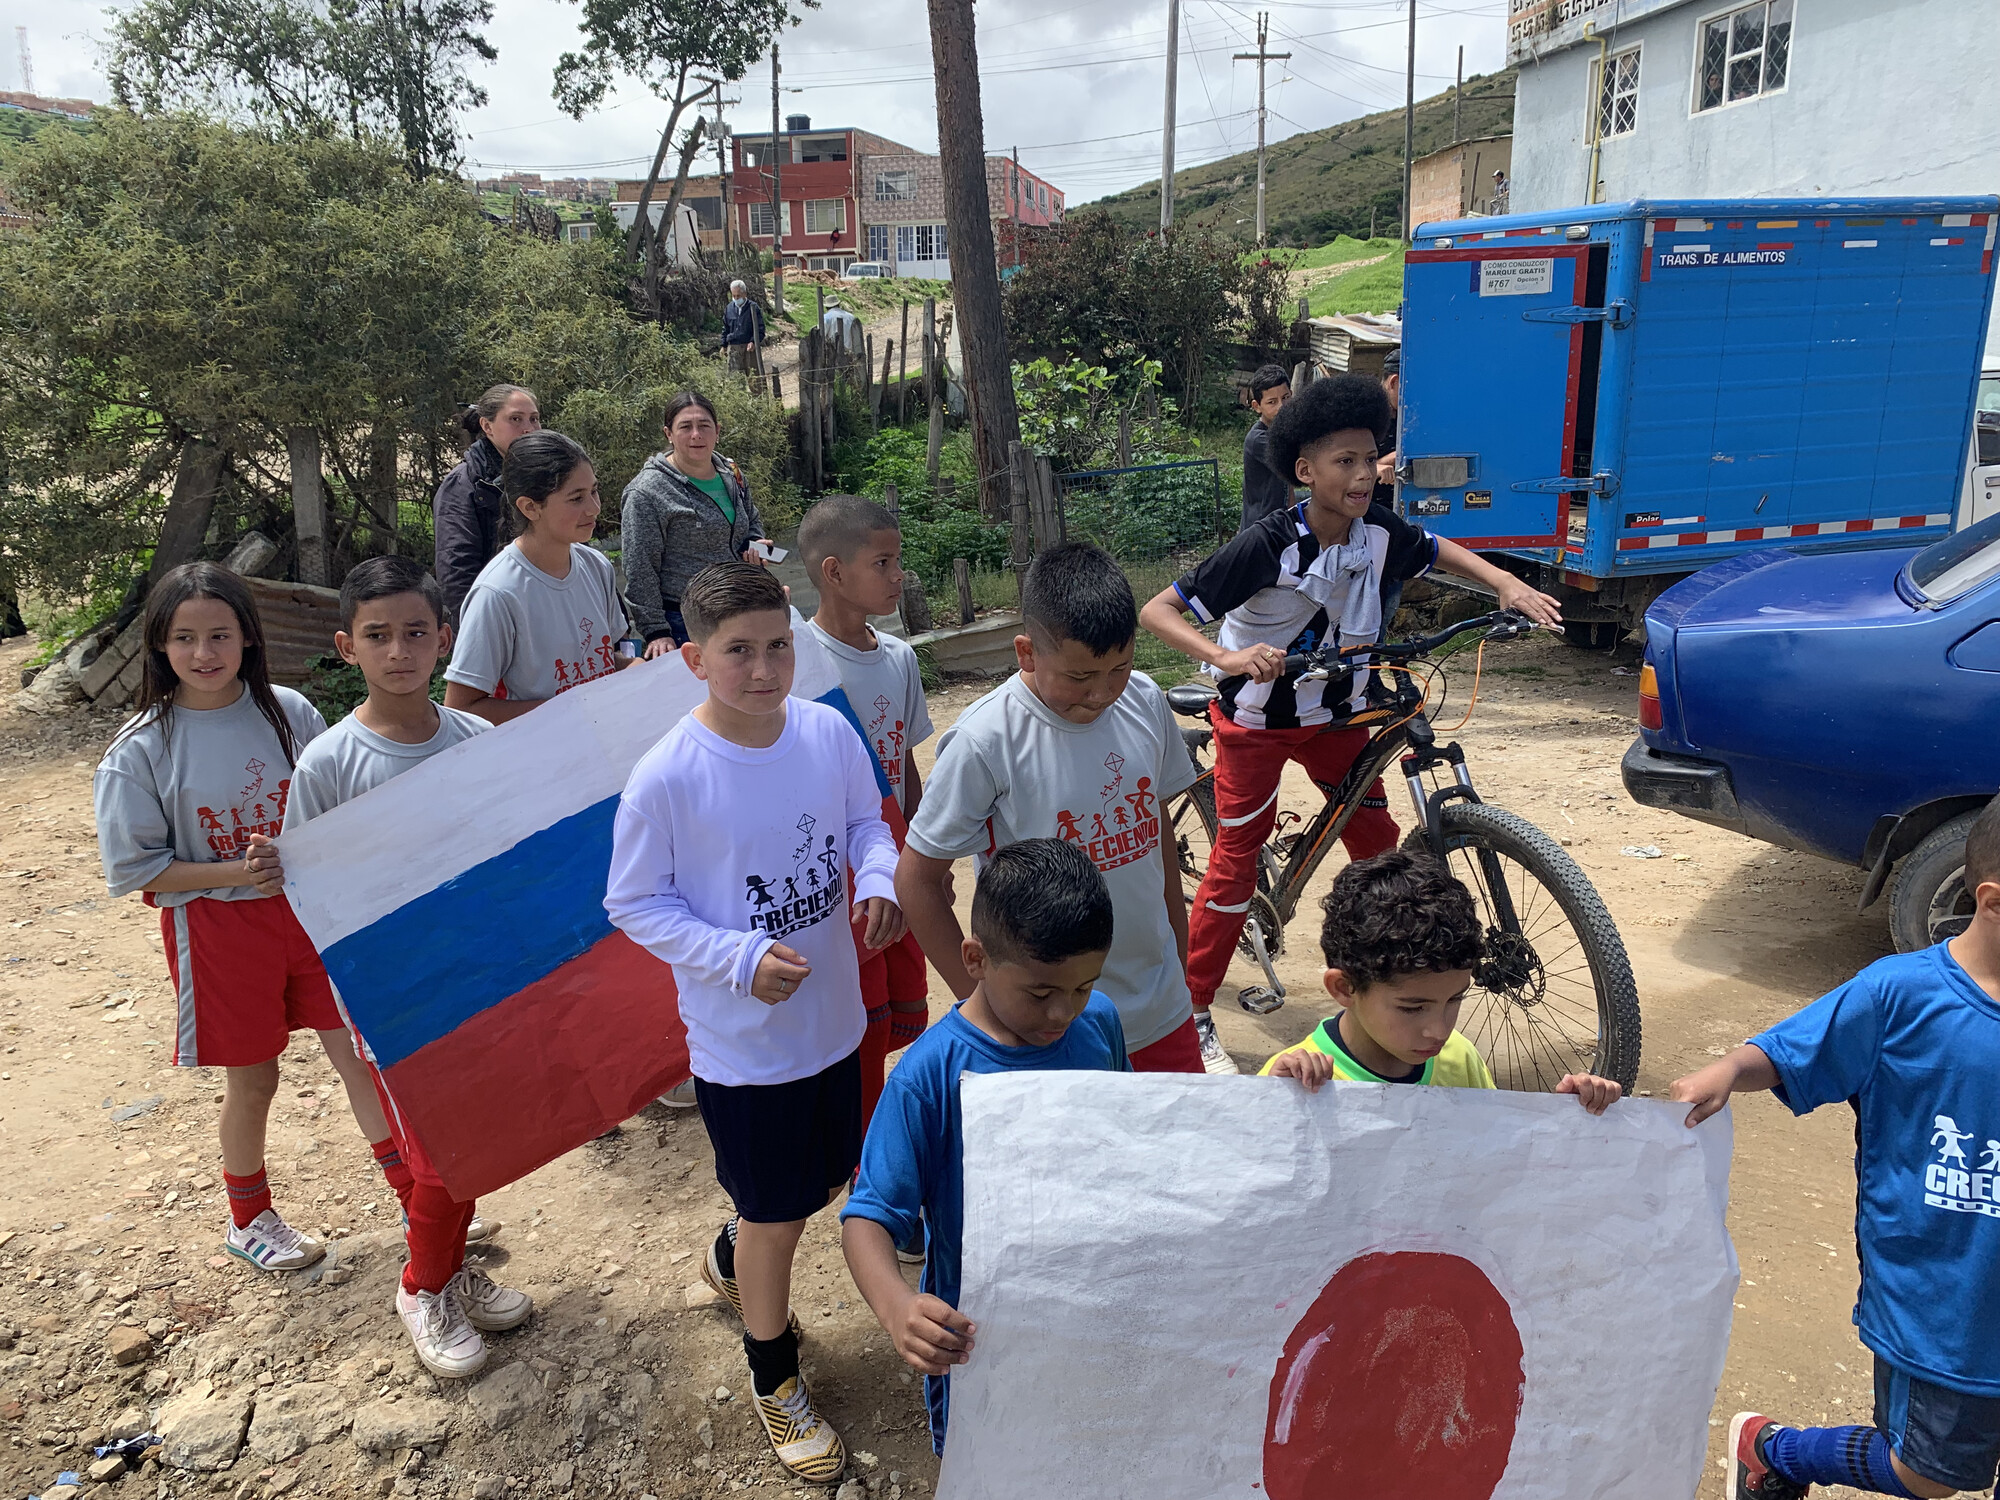 A group of children in Colombia. Two are holding makeshift country flags.